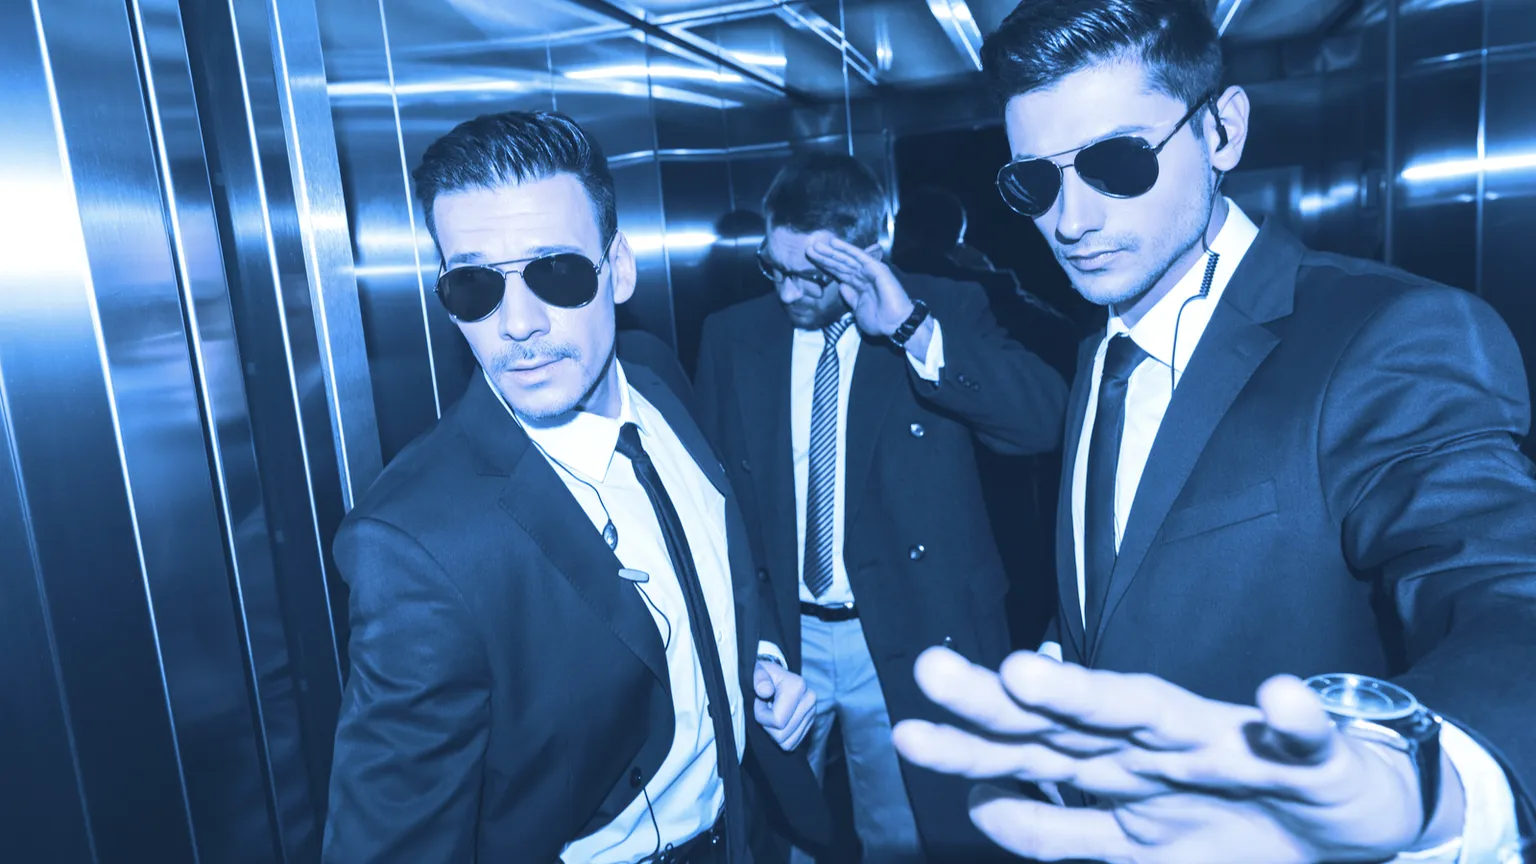 bodyguard obstructing paparazzi when celebrity going into elevator. Image: Shutterstock